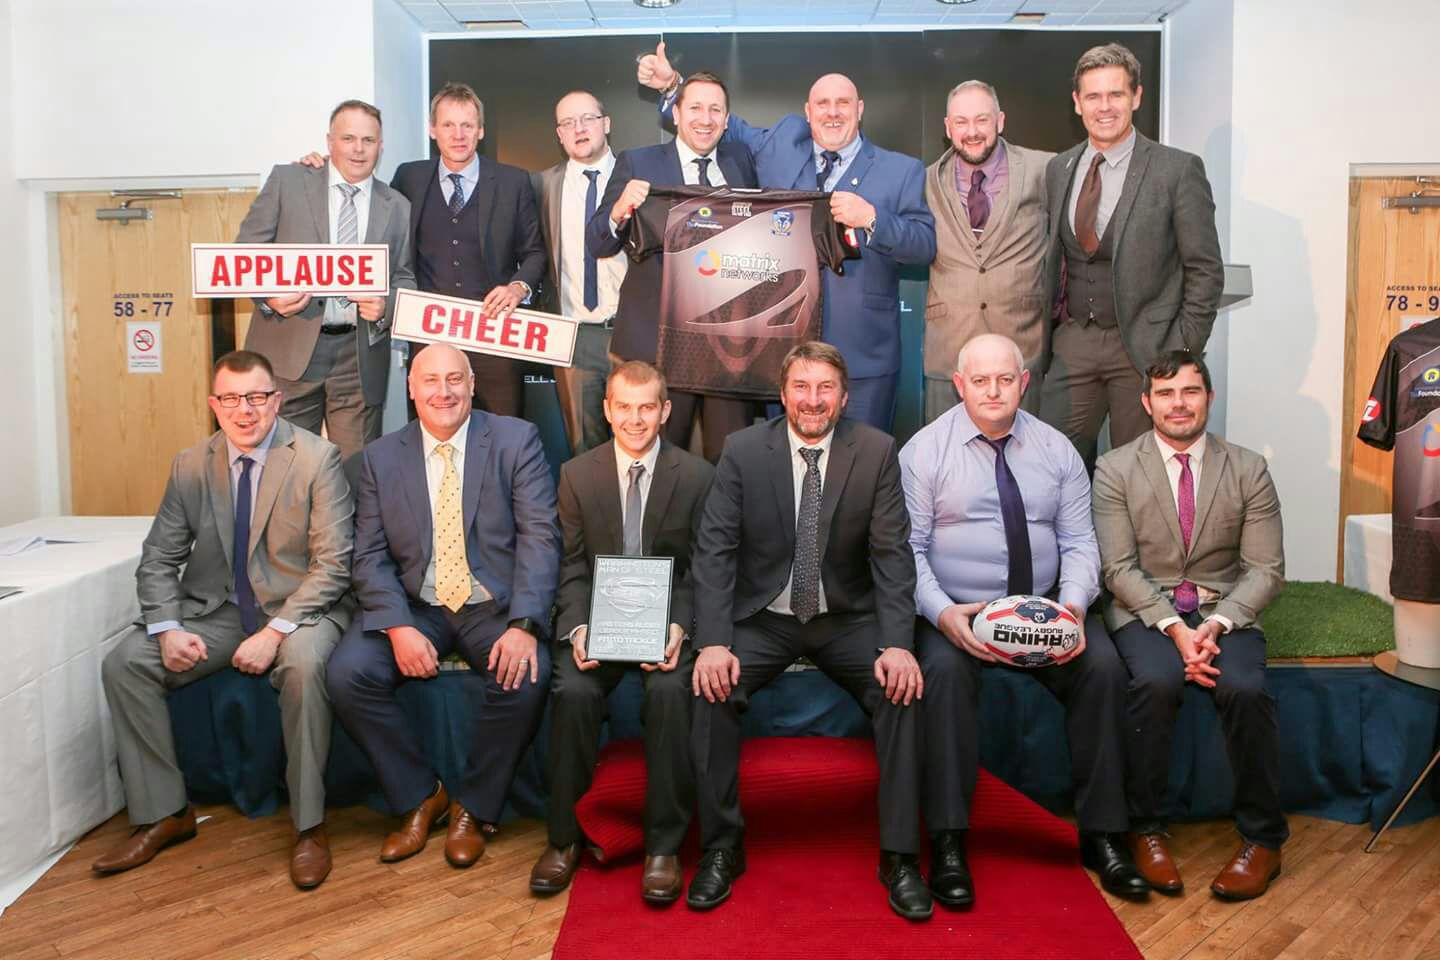 Touch rugby team picks up award after losing 40st in first year